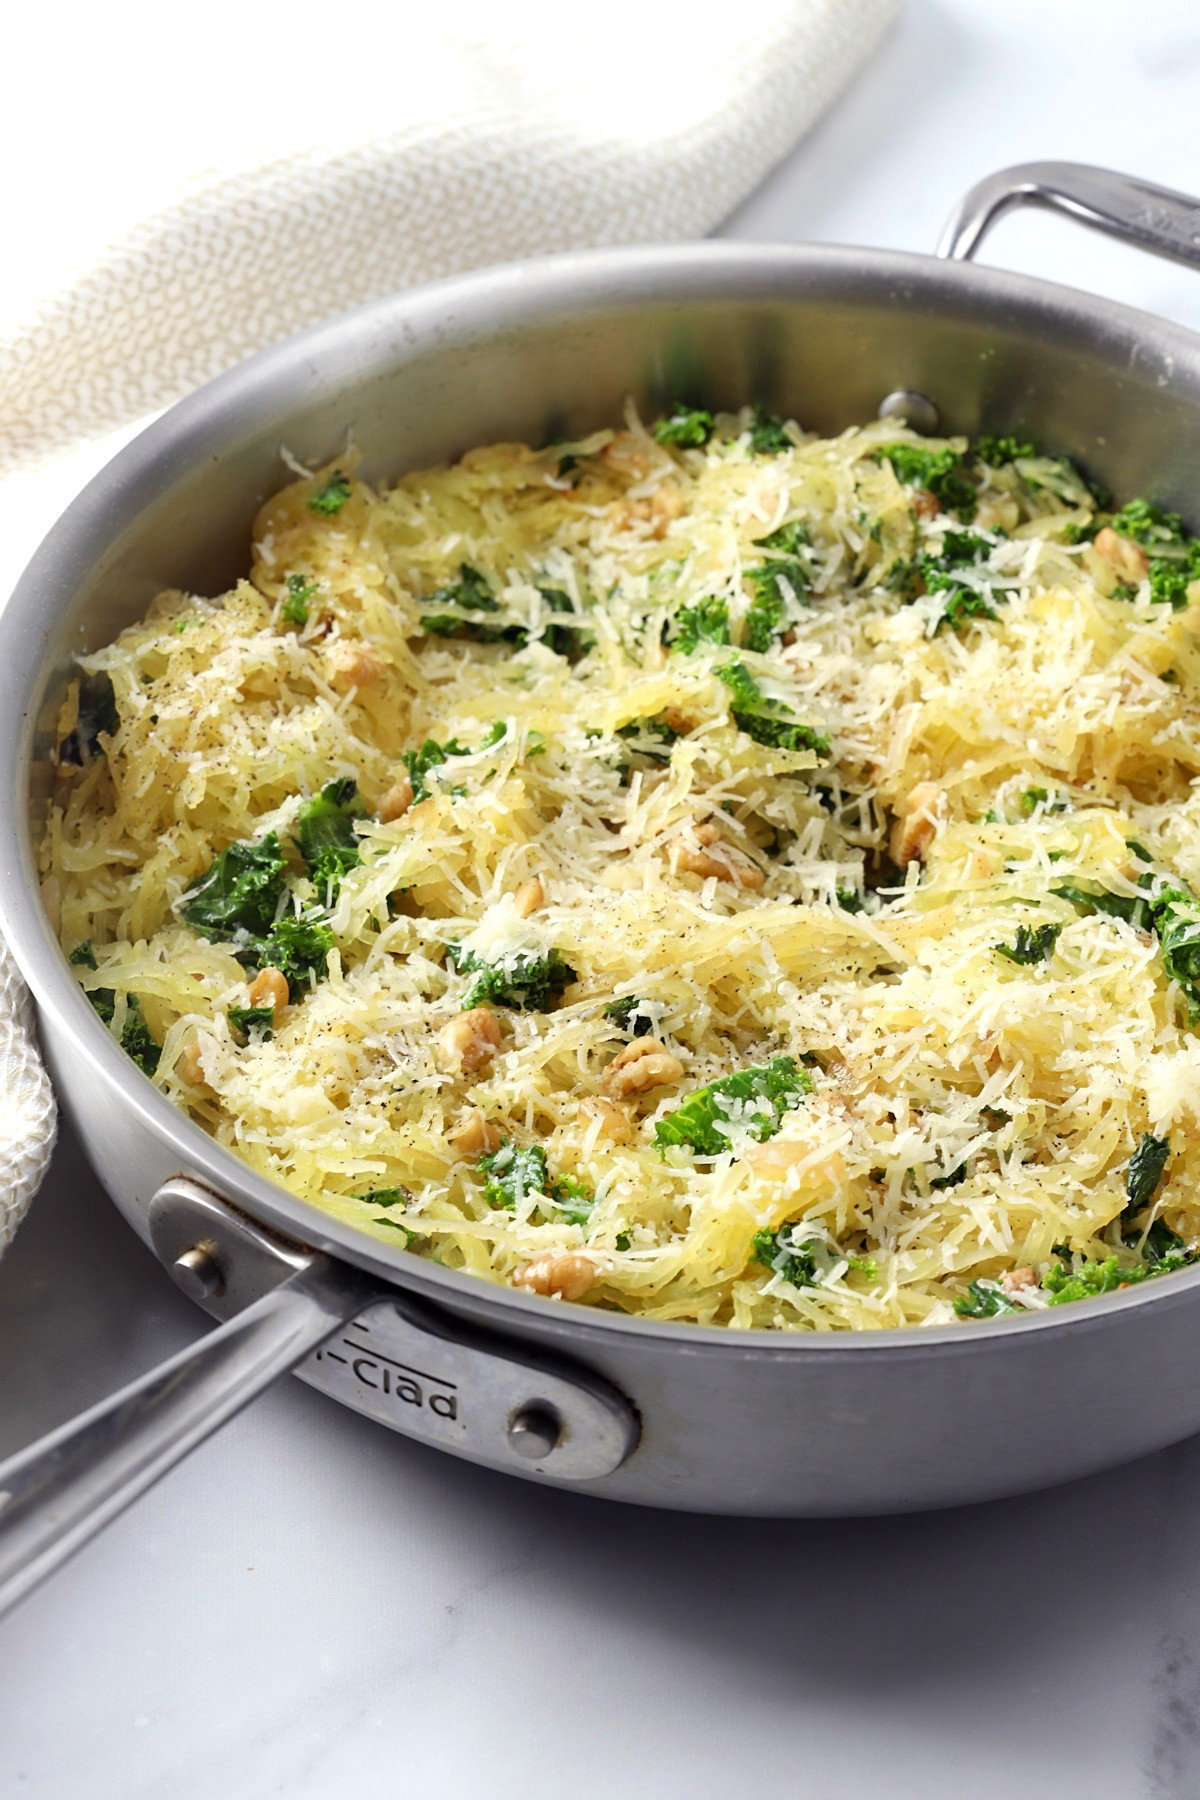 Parmesan cheese sprinkled on top of spaghetti squash in a pan.